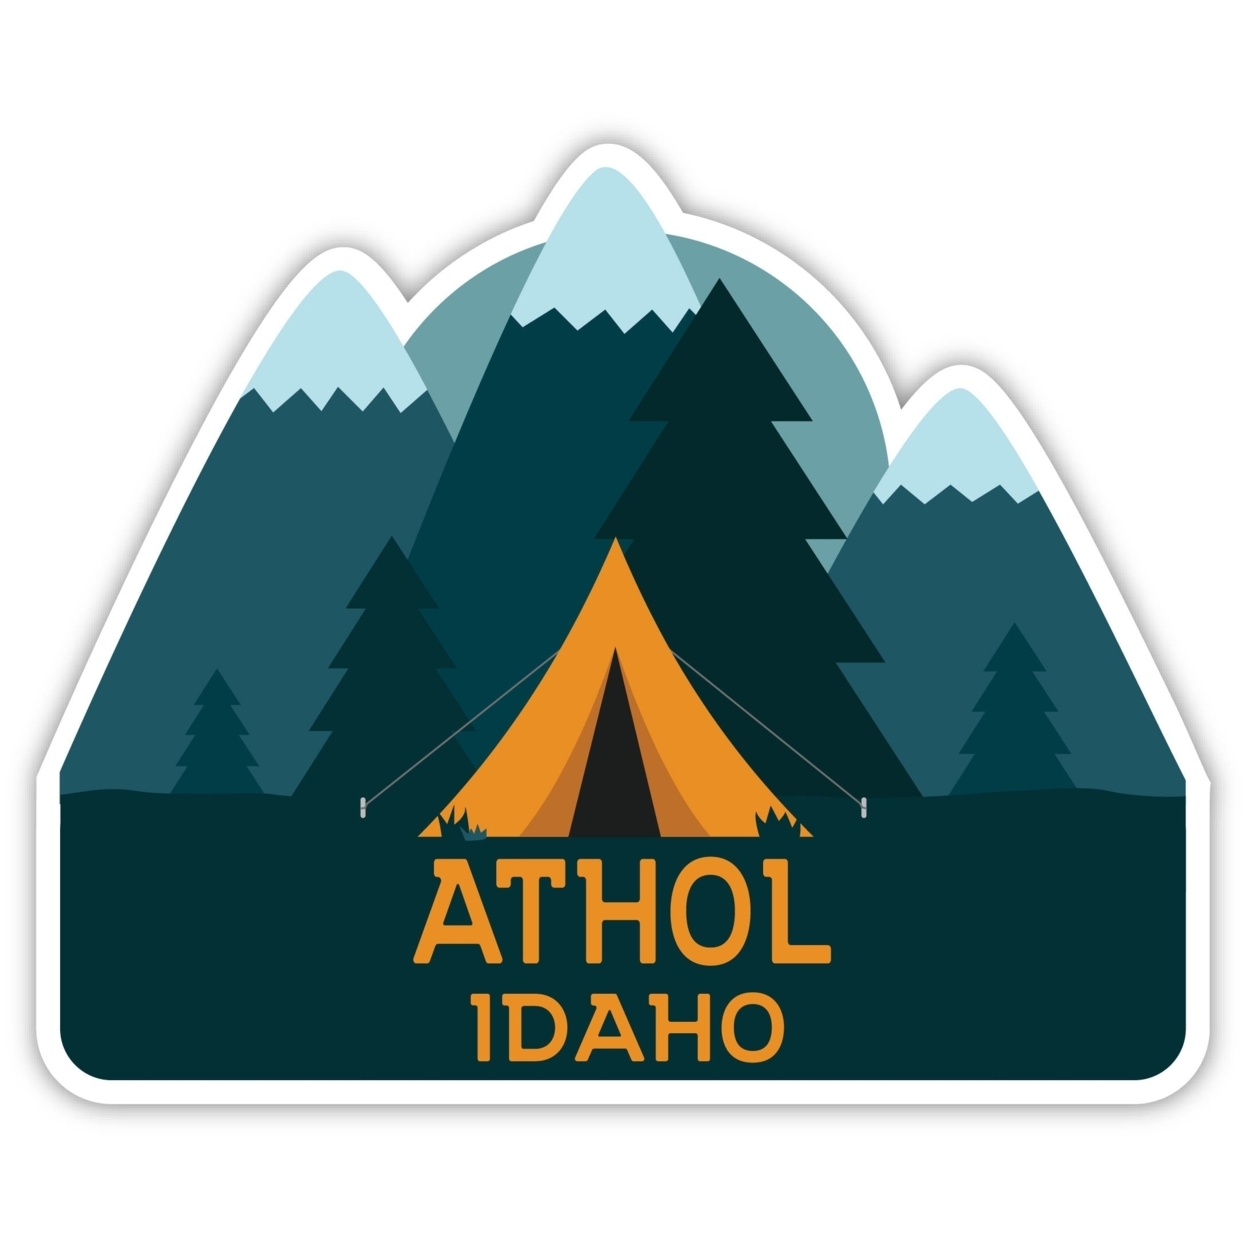 Athol Idaho Souvenir Decorative Stickers (Choose Theme And Size) - 4-Pack, 2-Inch, Tent